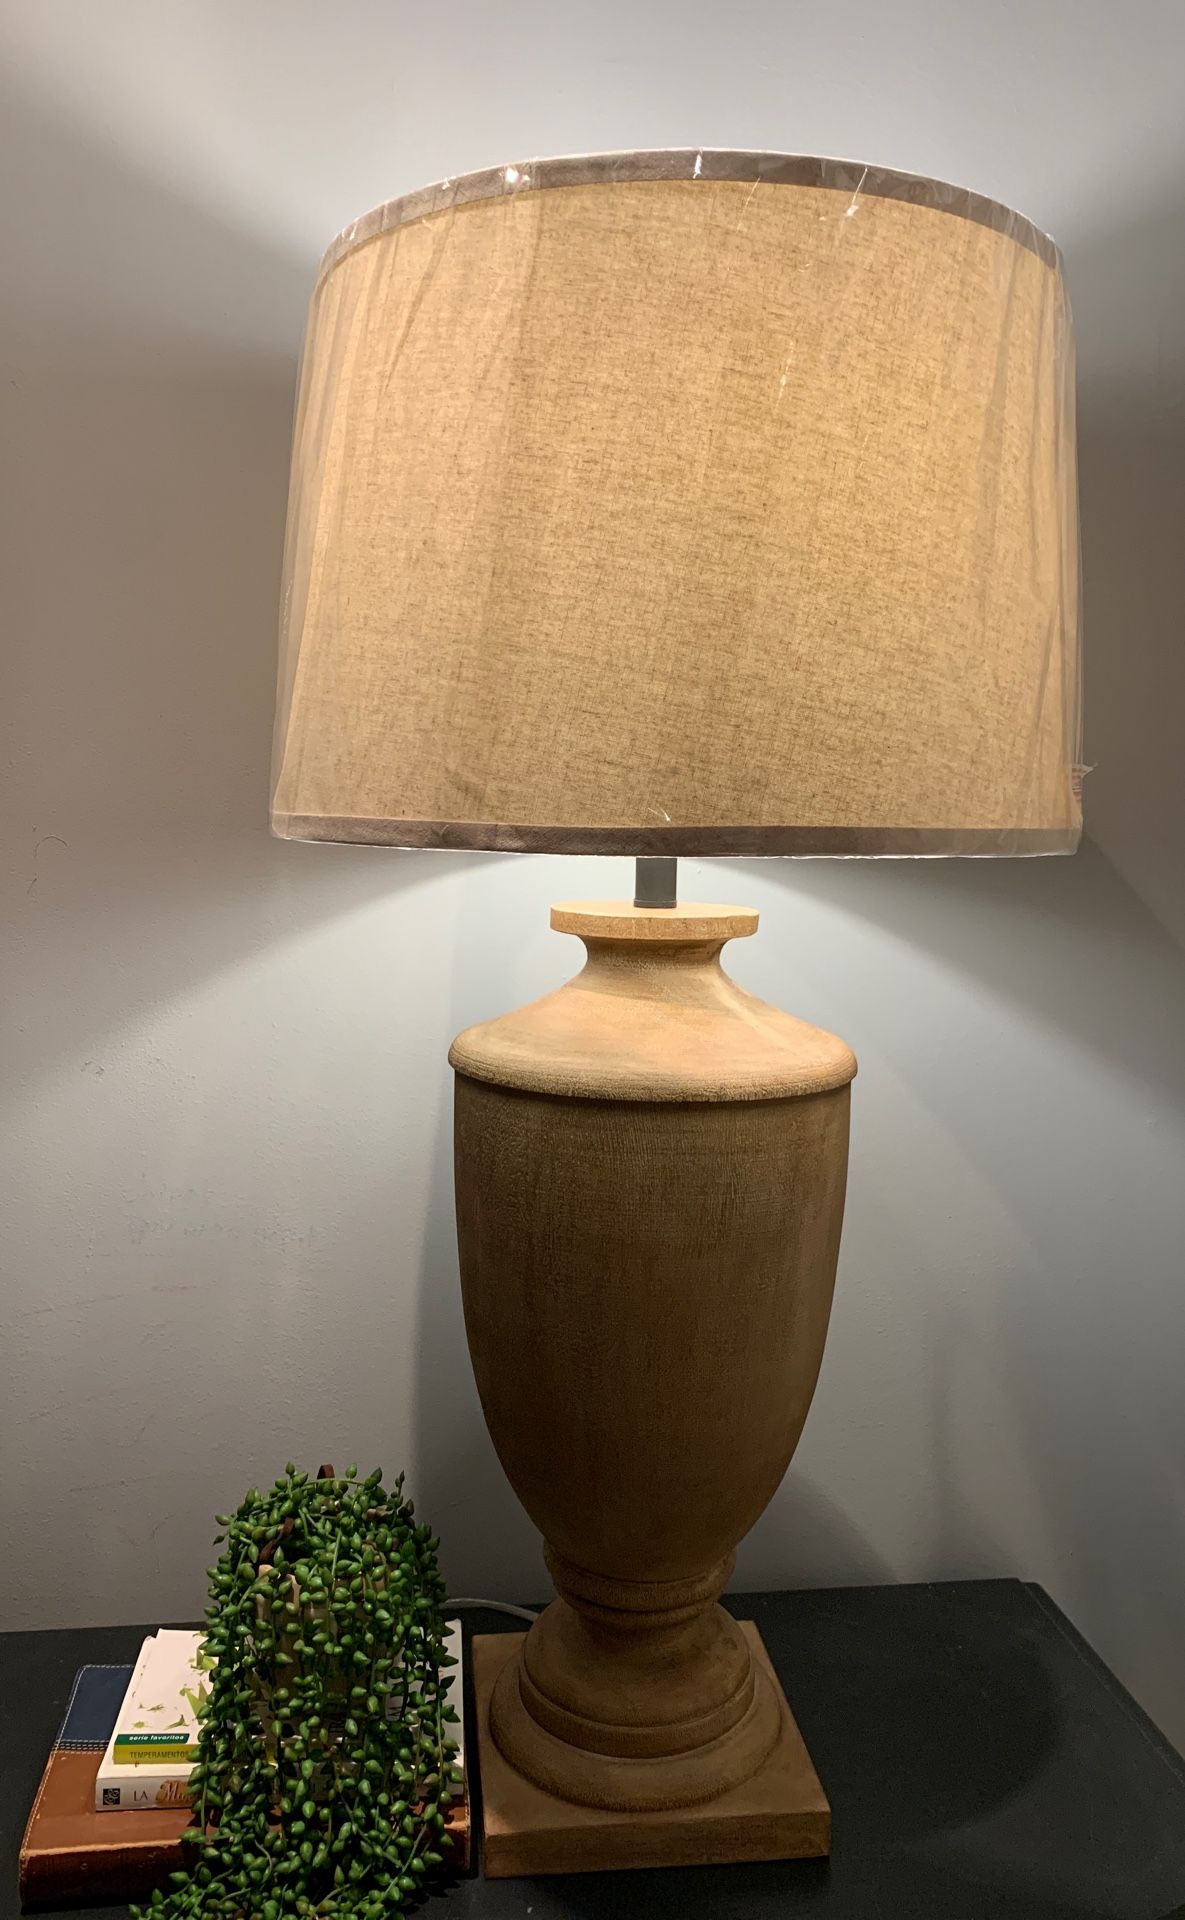 Large Lamp with shade. New